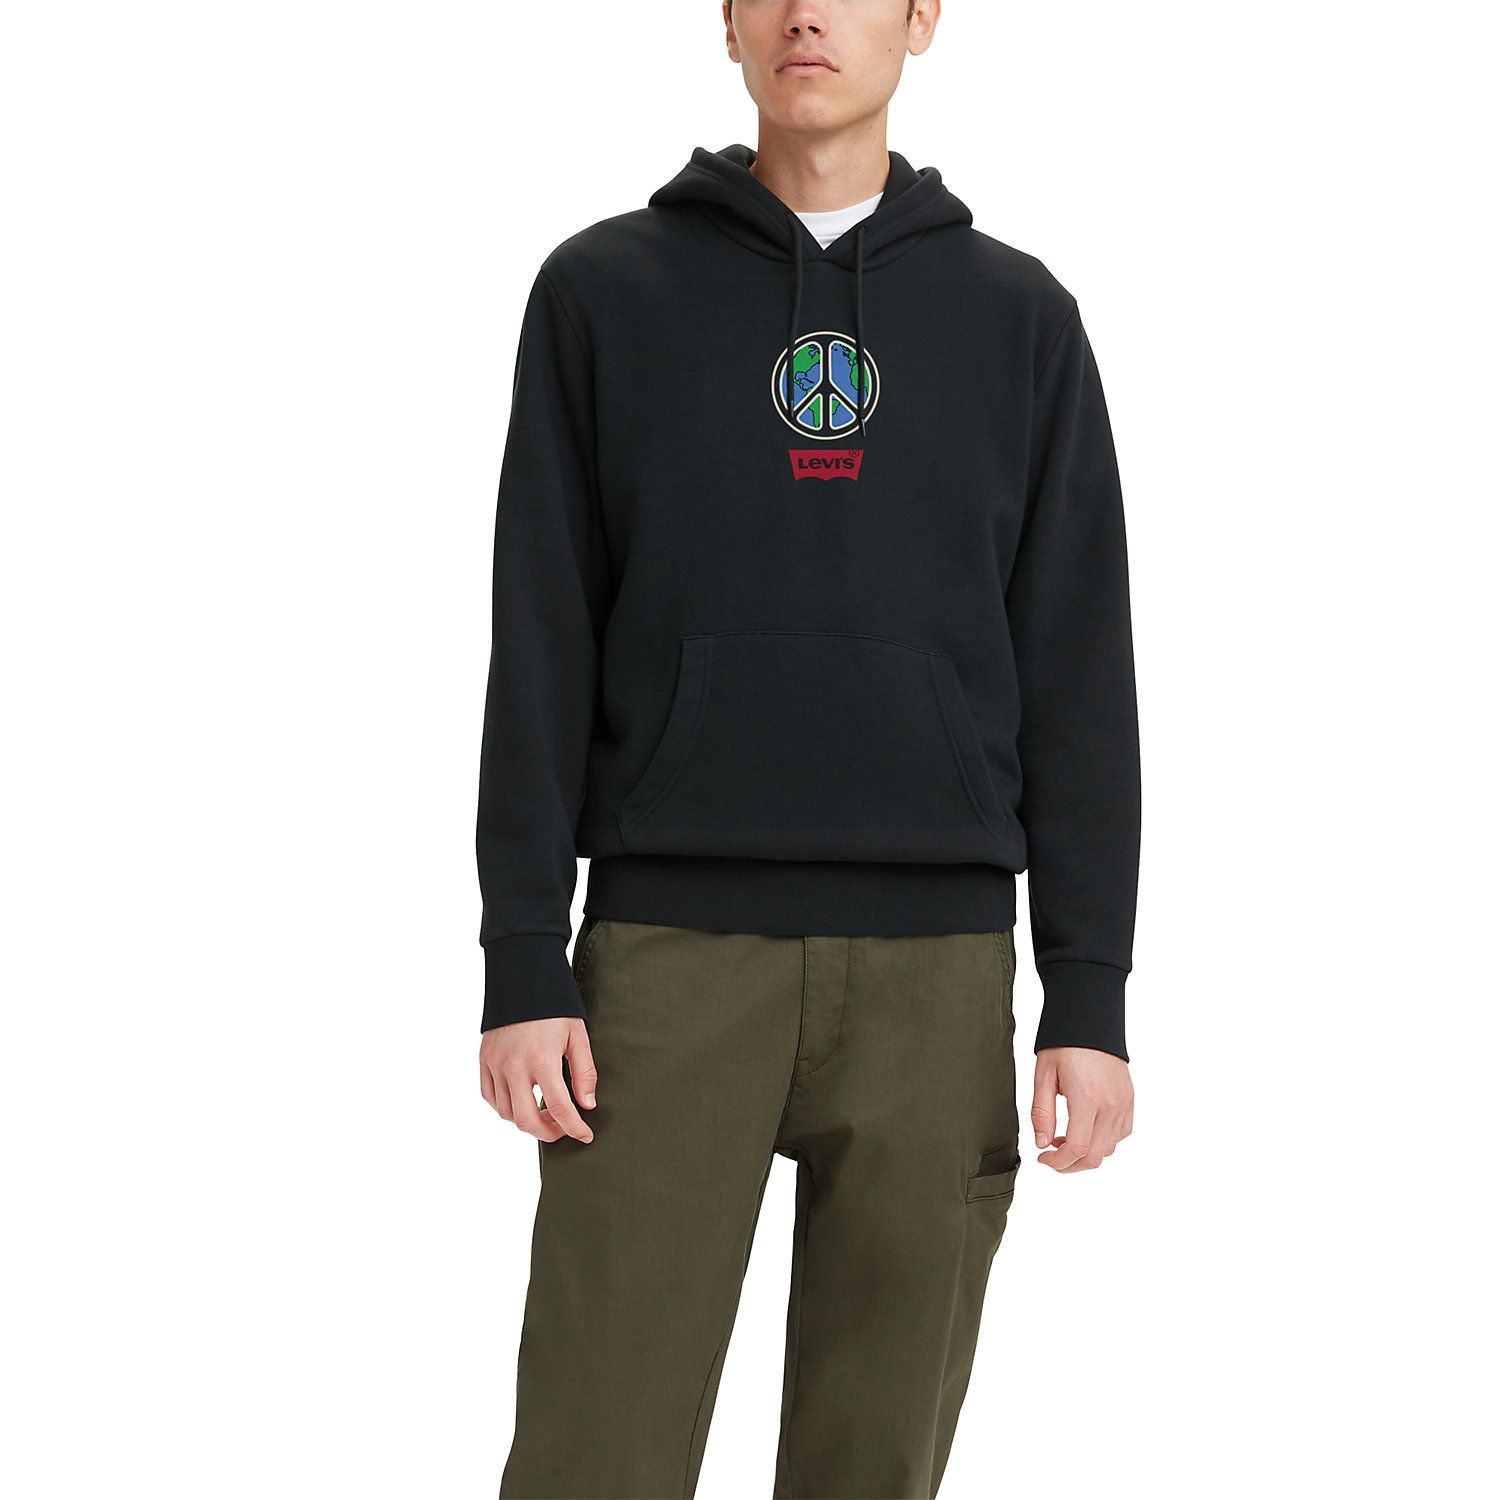 Image for Levi's Men's Logo Graphic Hoodie at Kohl's.